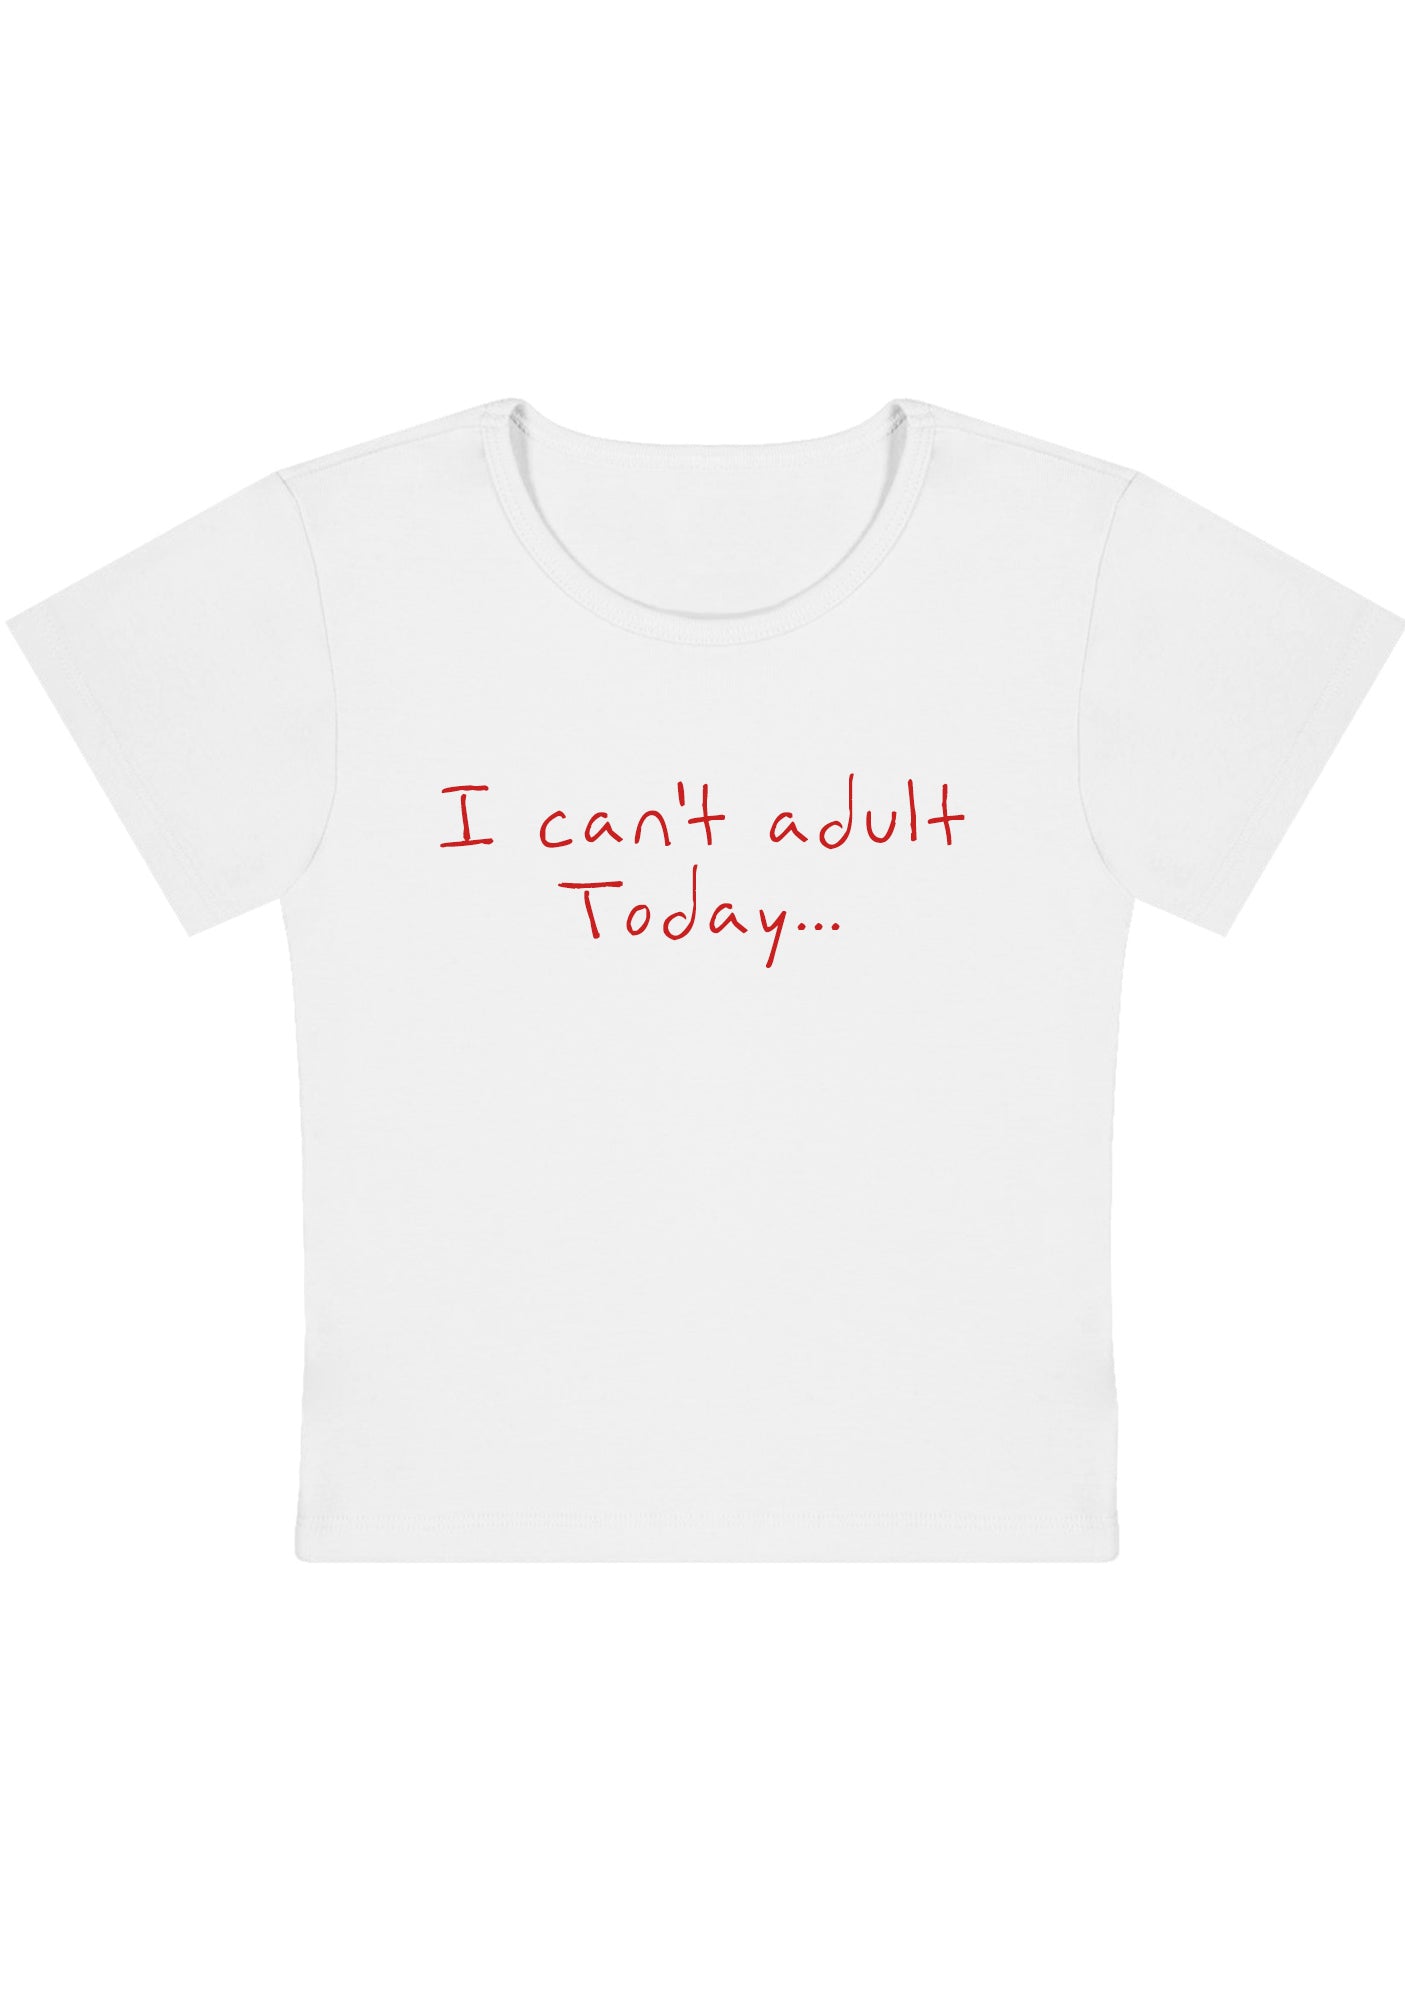 I Cannot Adult Today Y2K Baby Tee